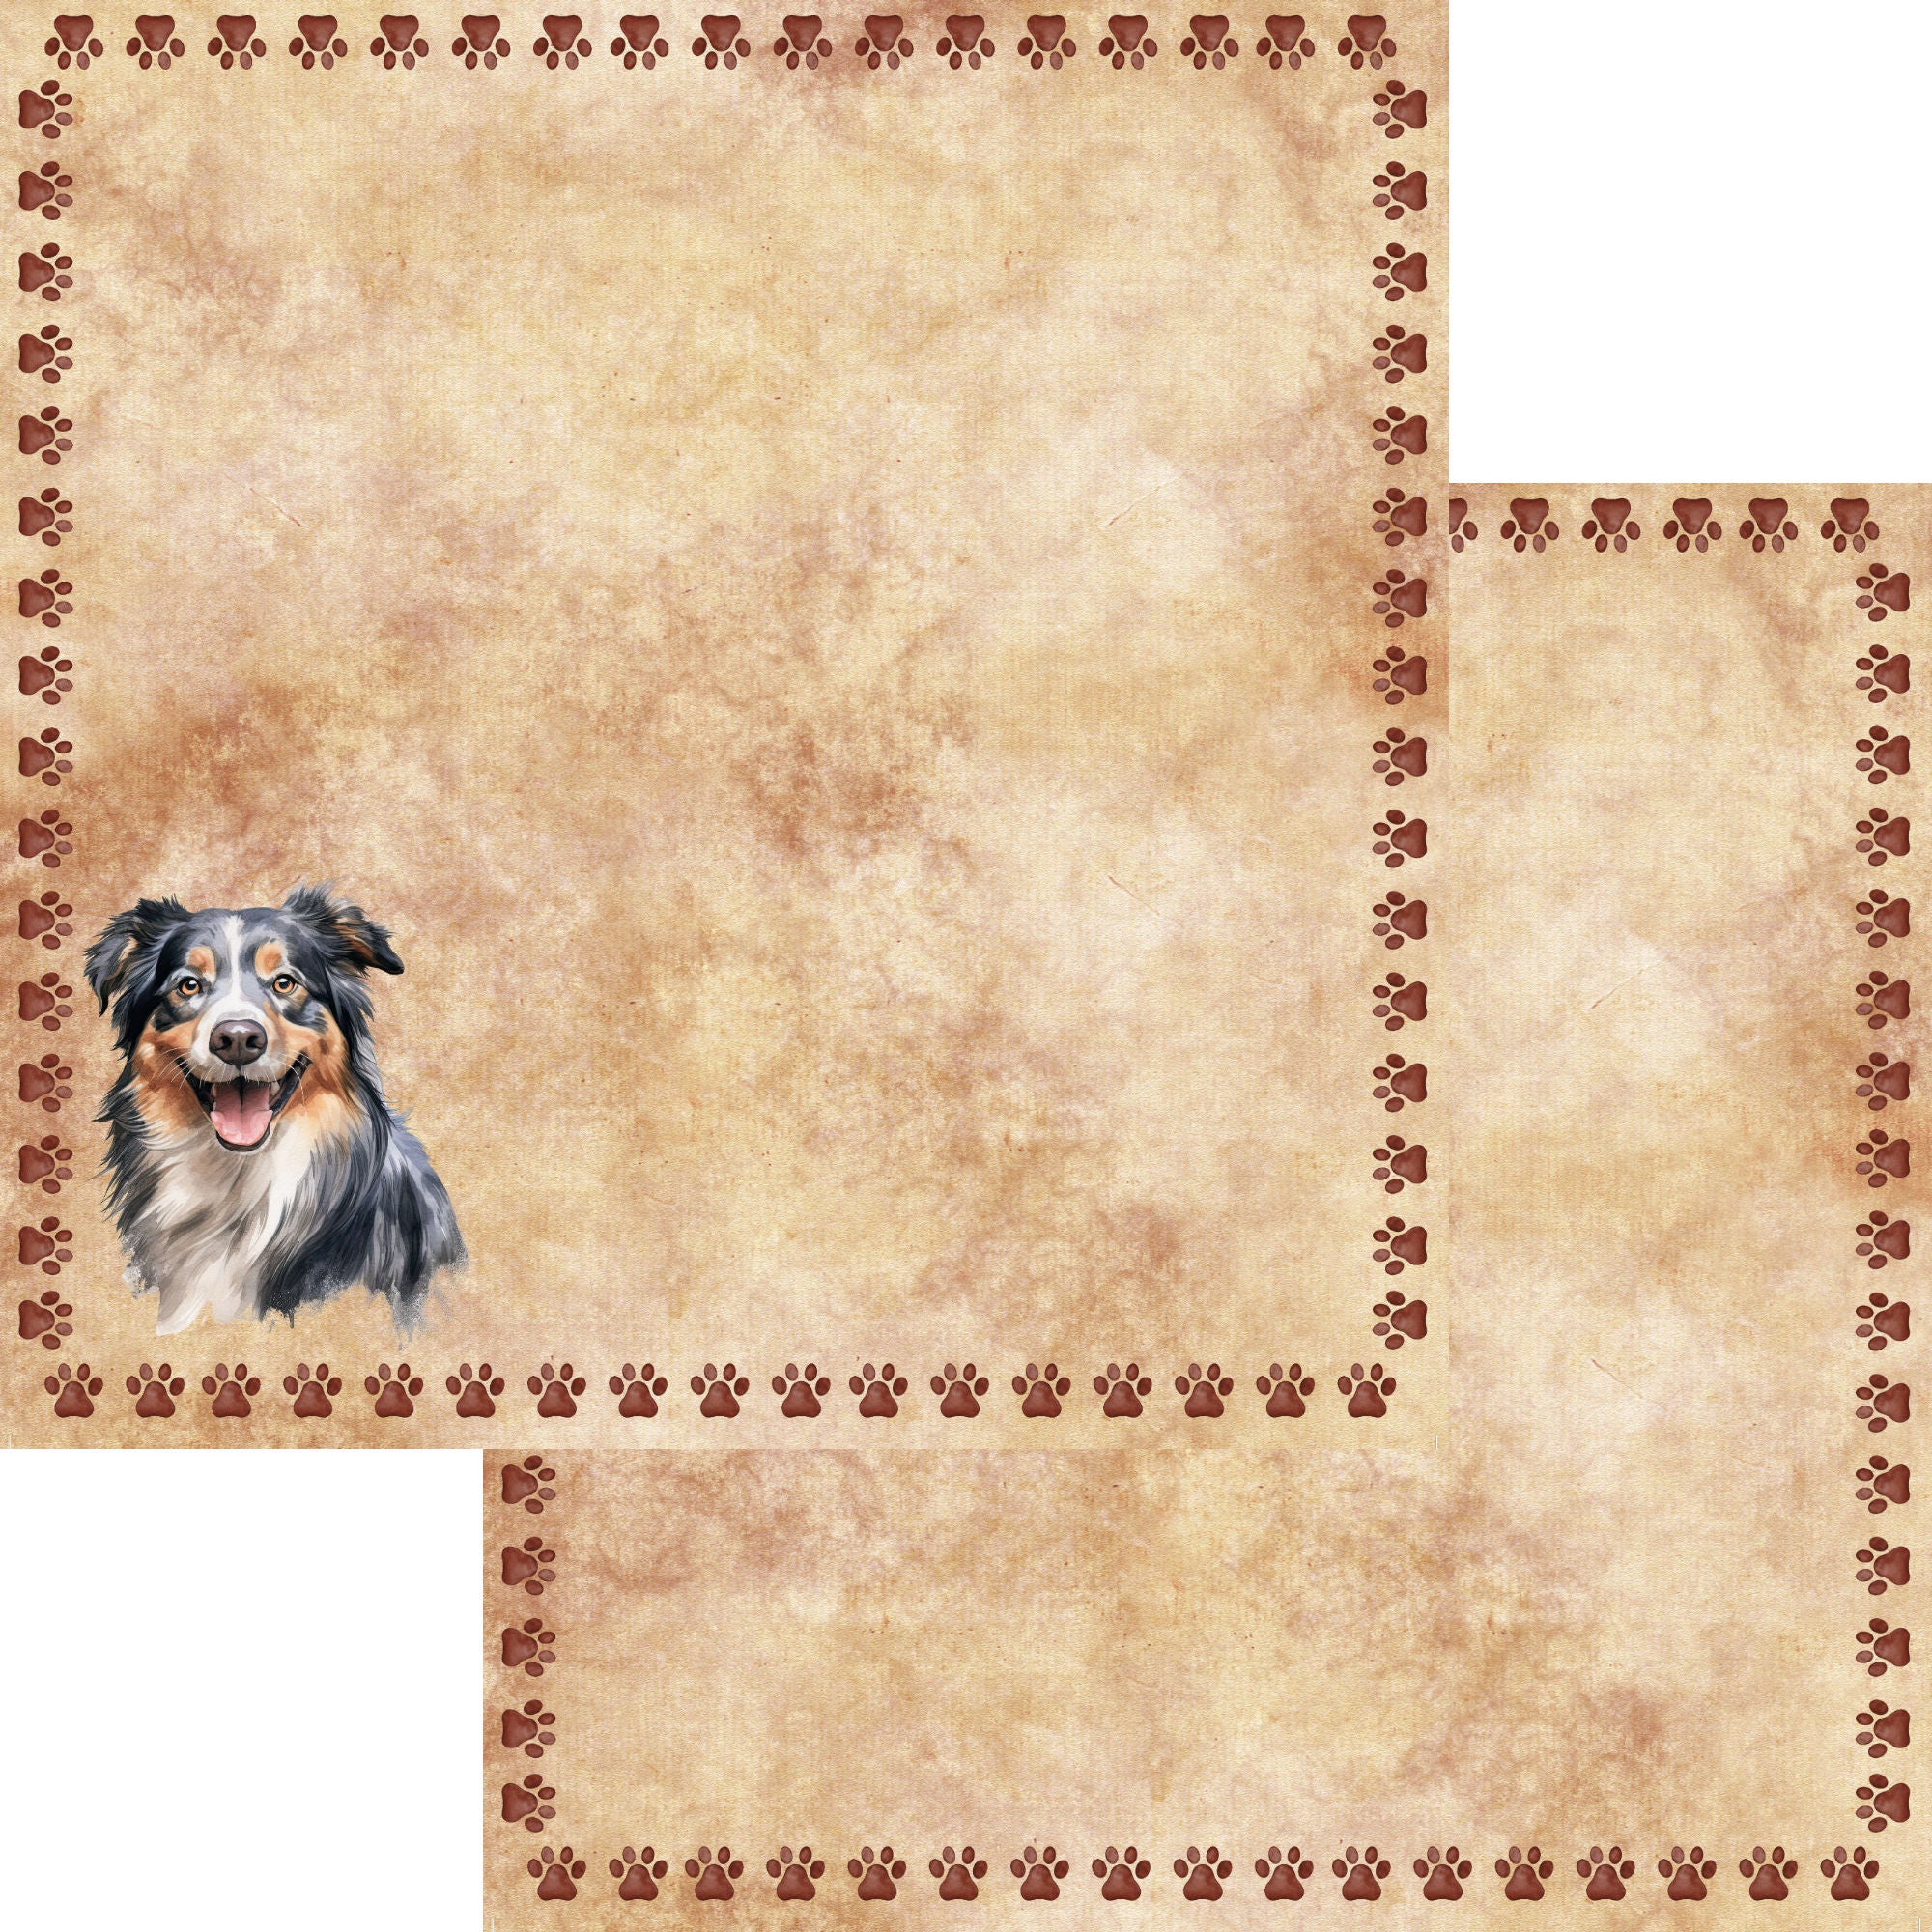 Dog Breeds Collection Australian Shepherd 12 x 12 Double-Sided Scrapbook Paper by SSC Designs